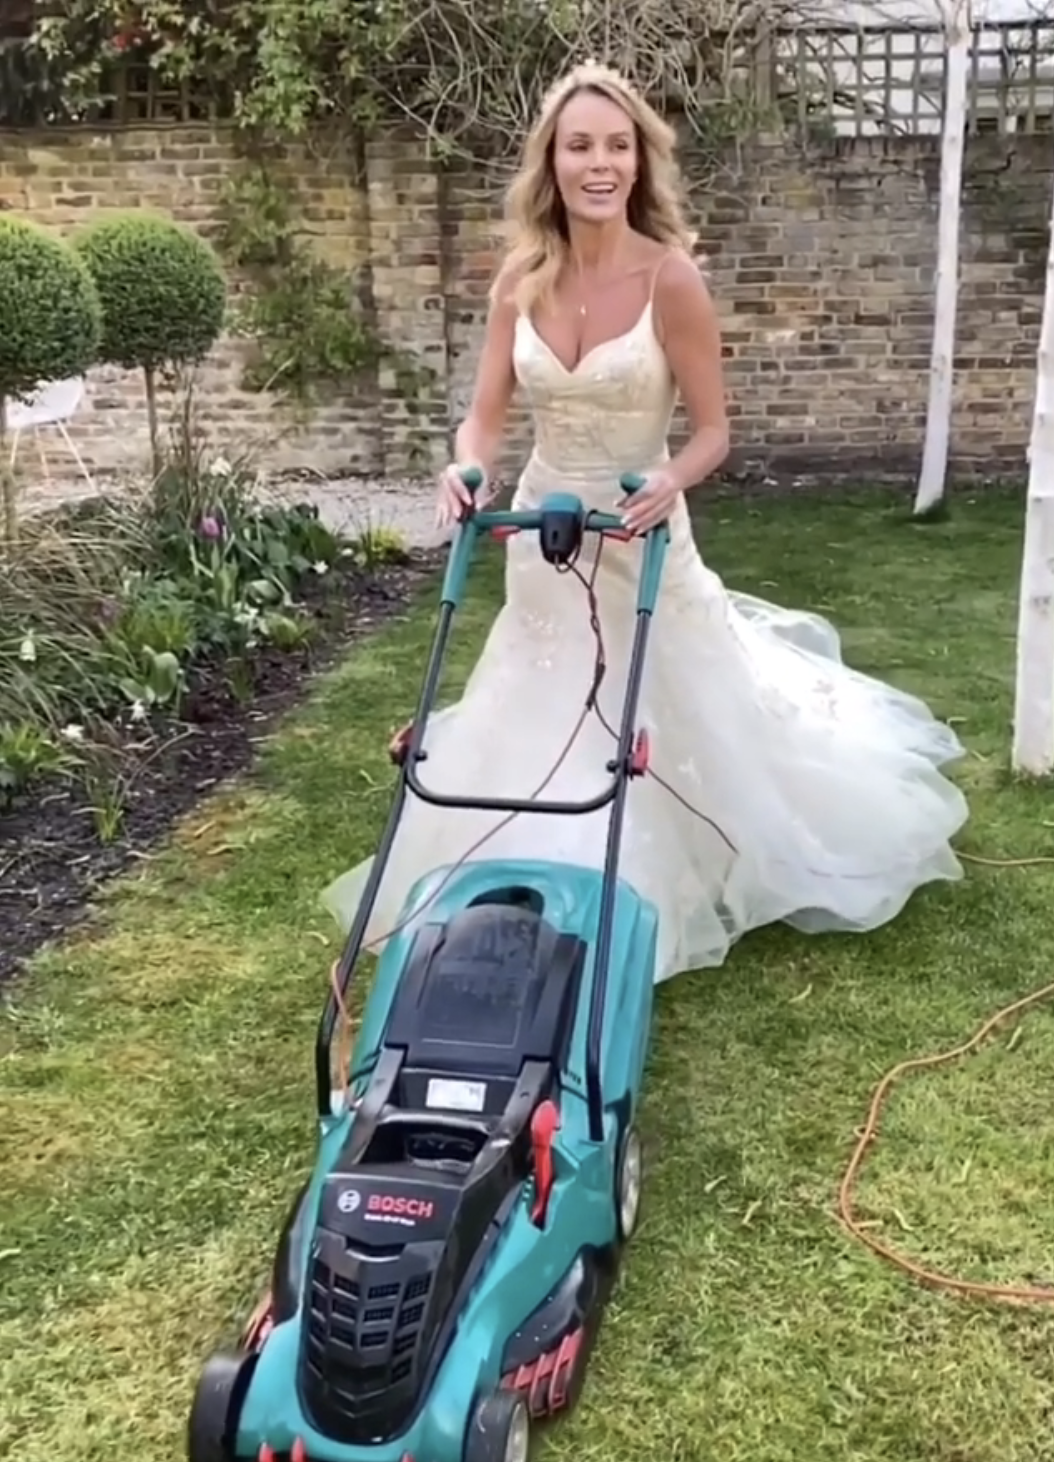 her mowing the lawn while wearing a long wedding dress